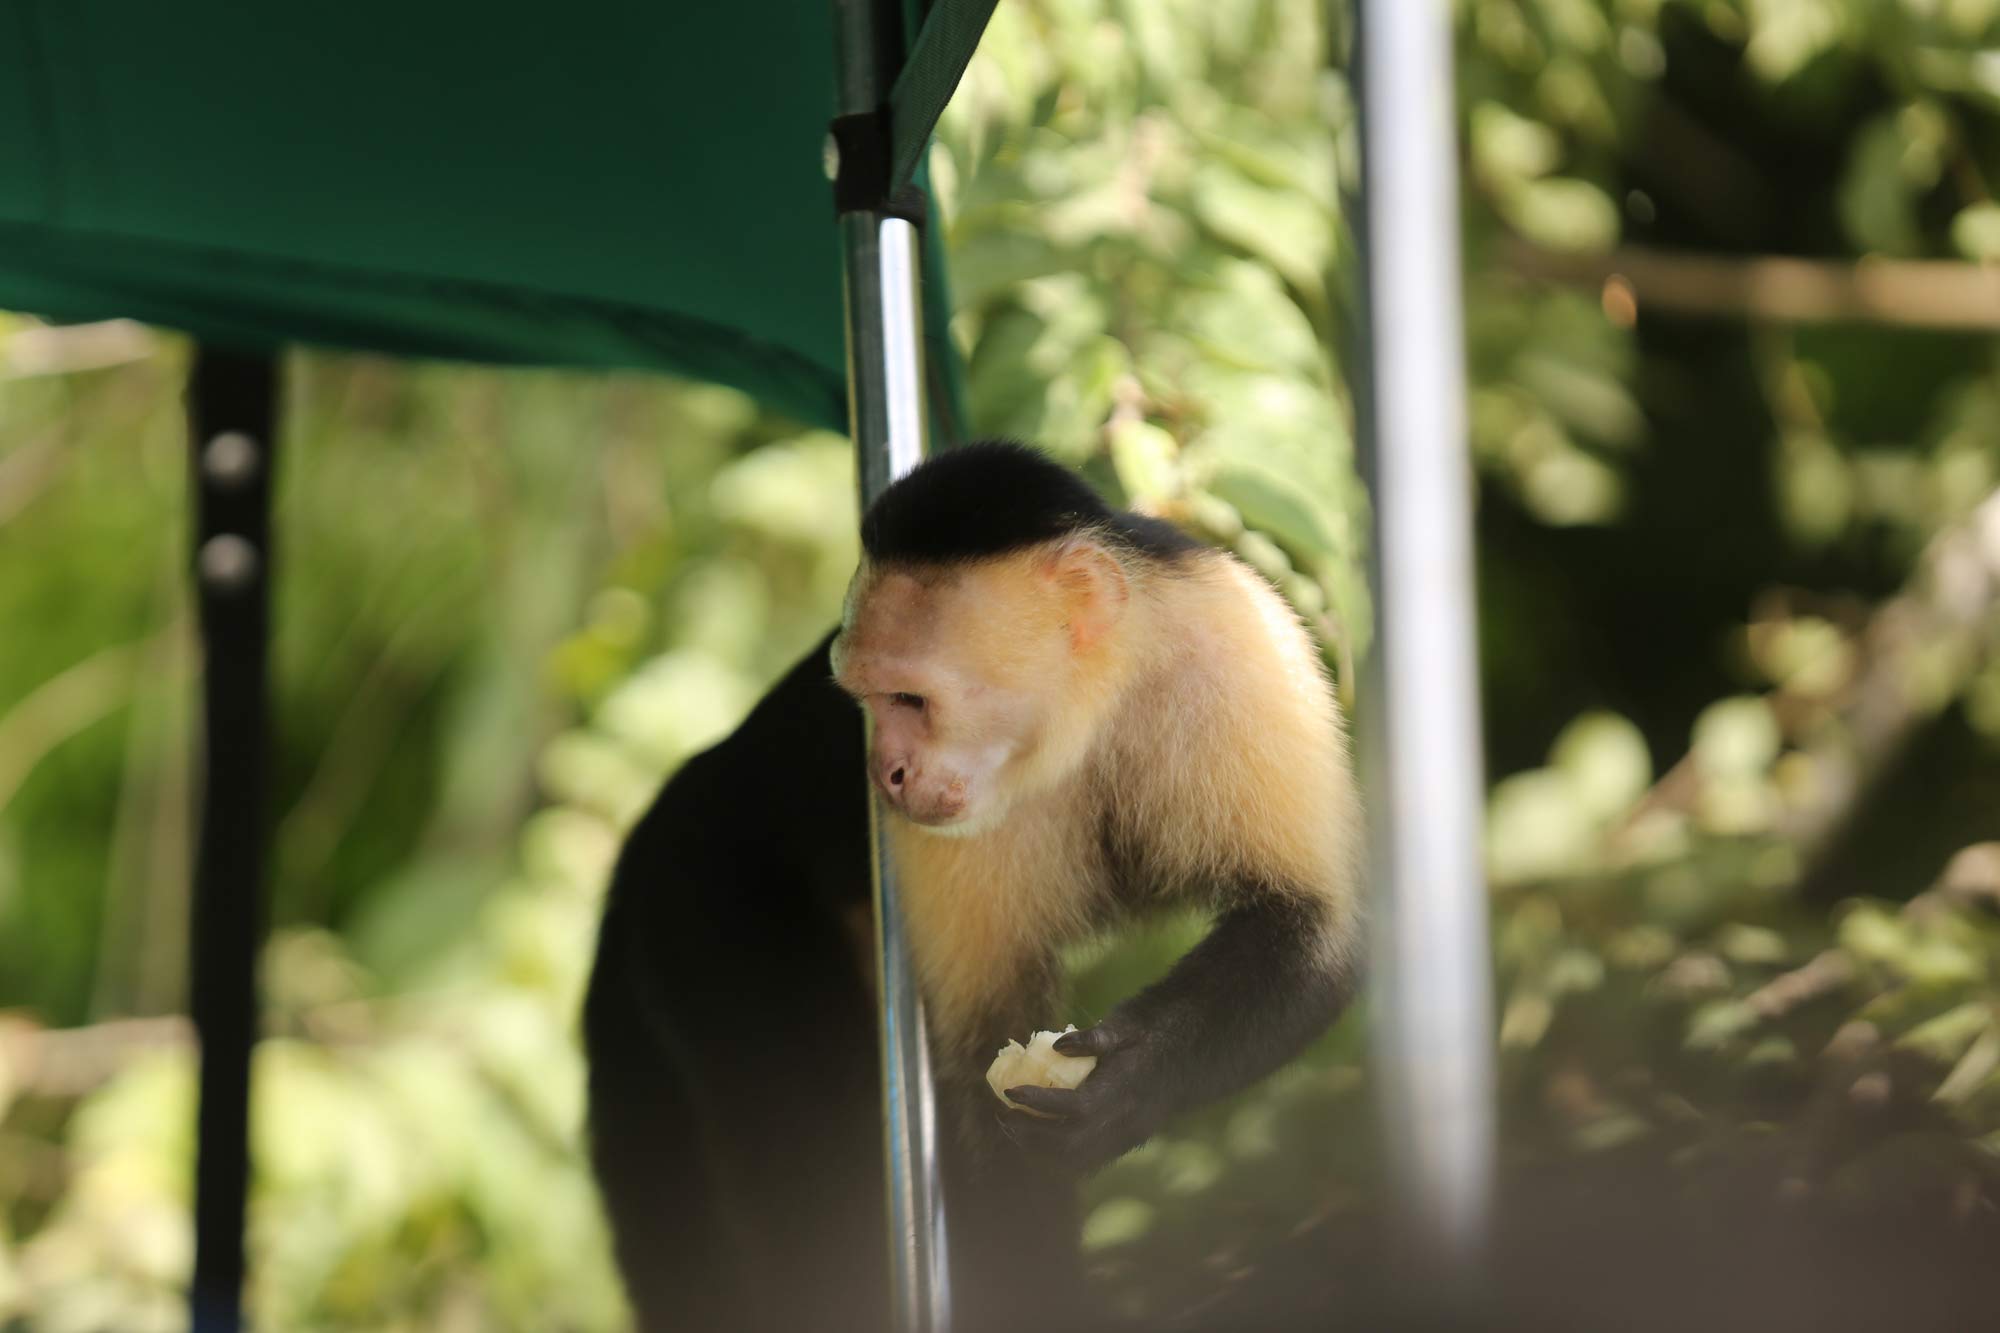 White faced capuchin coming onto boat on Monkey Island